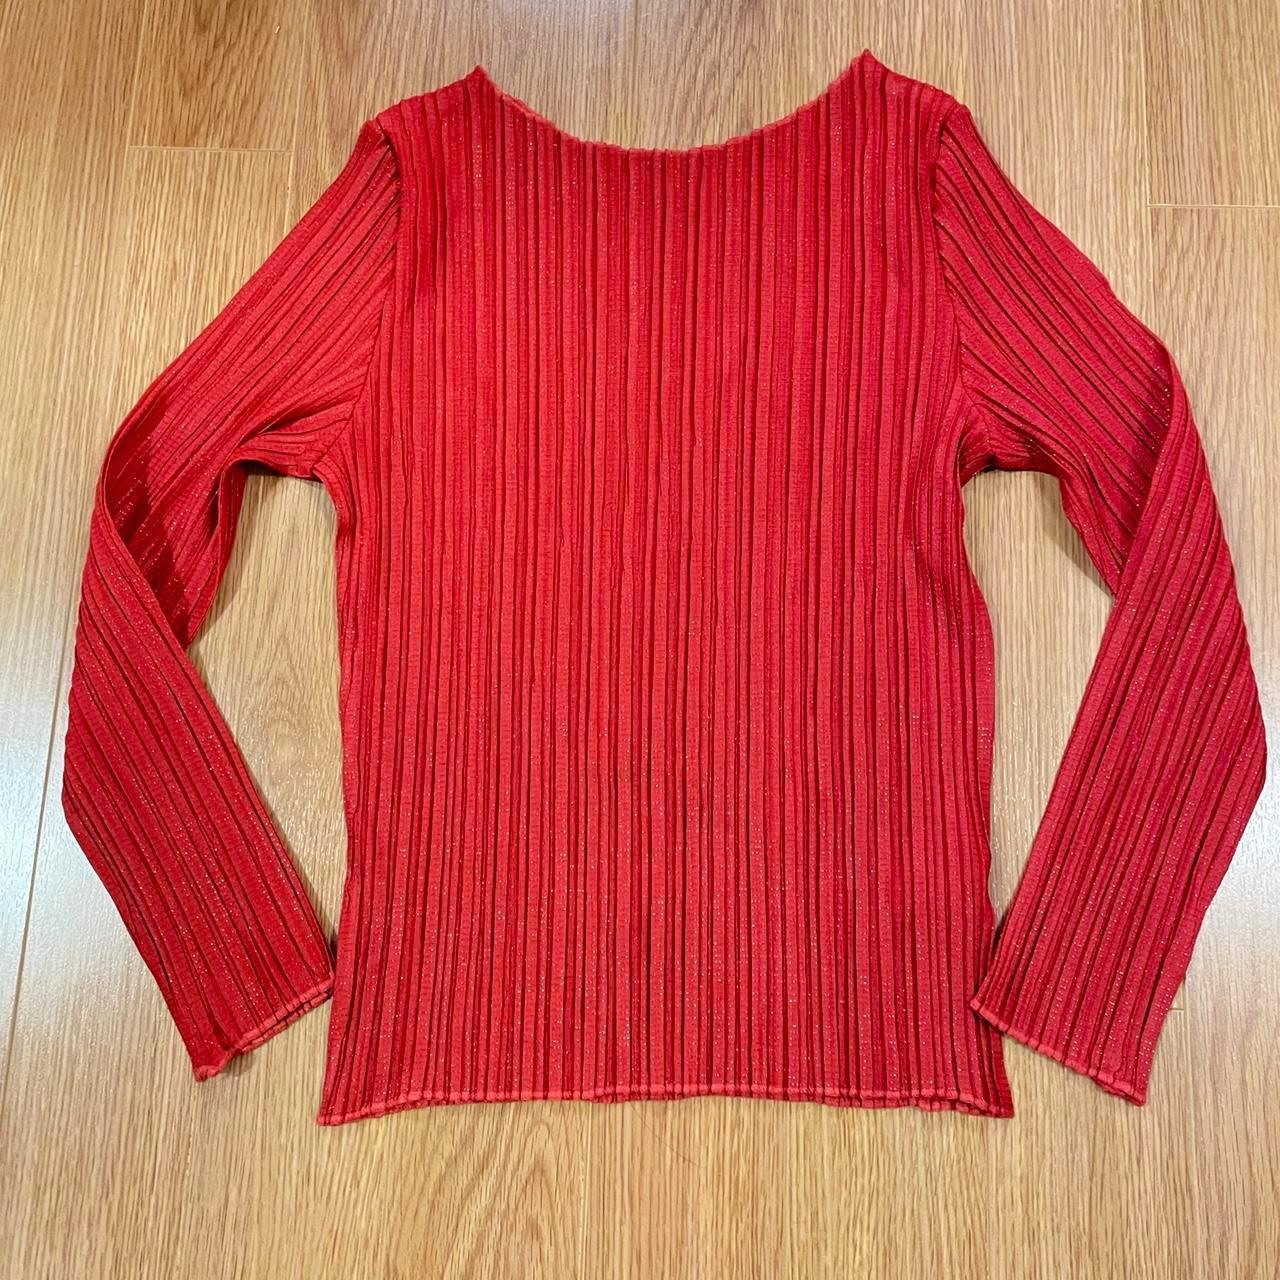 Marks & Spencer Women's Red and Silver Blouse (2)